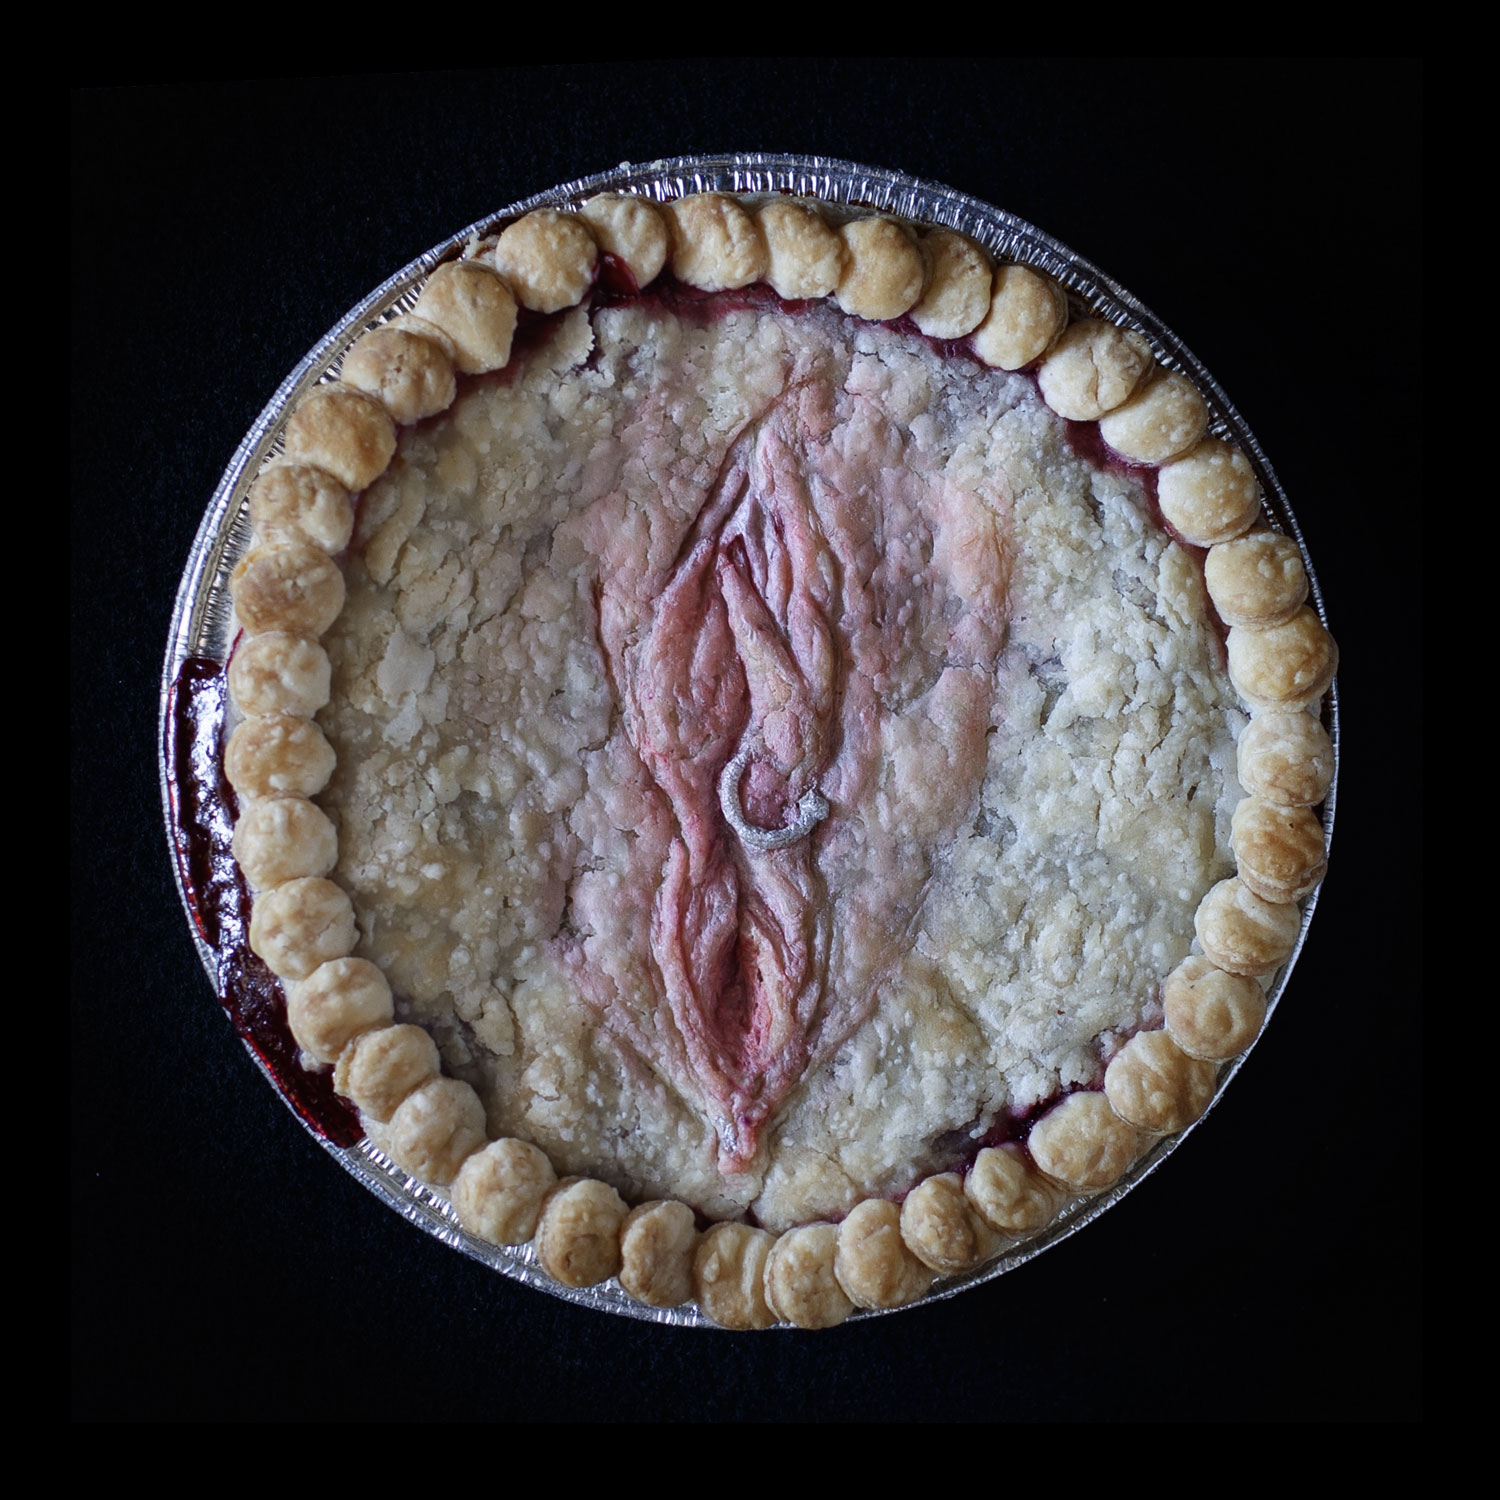 Baked version of pie 75 created in the likeness of a vulva. The pie in on a black background with overlapping pie crust circles for the border. The vulva has a silver piercing through the right labia made of pie dough. 